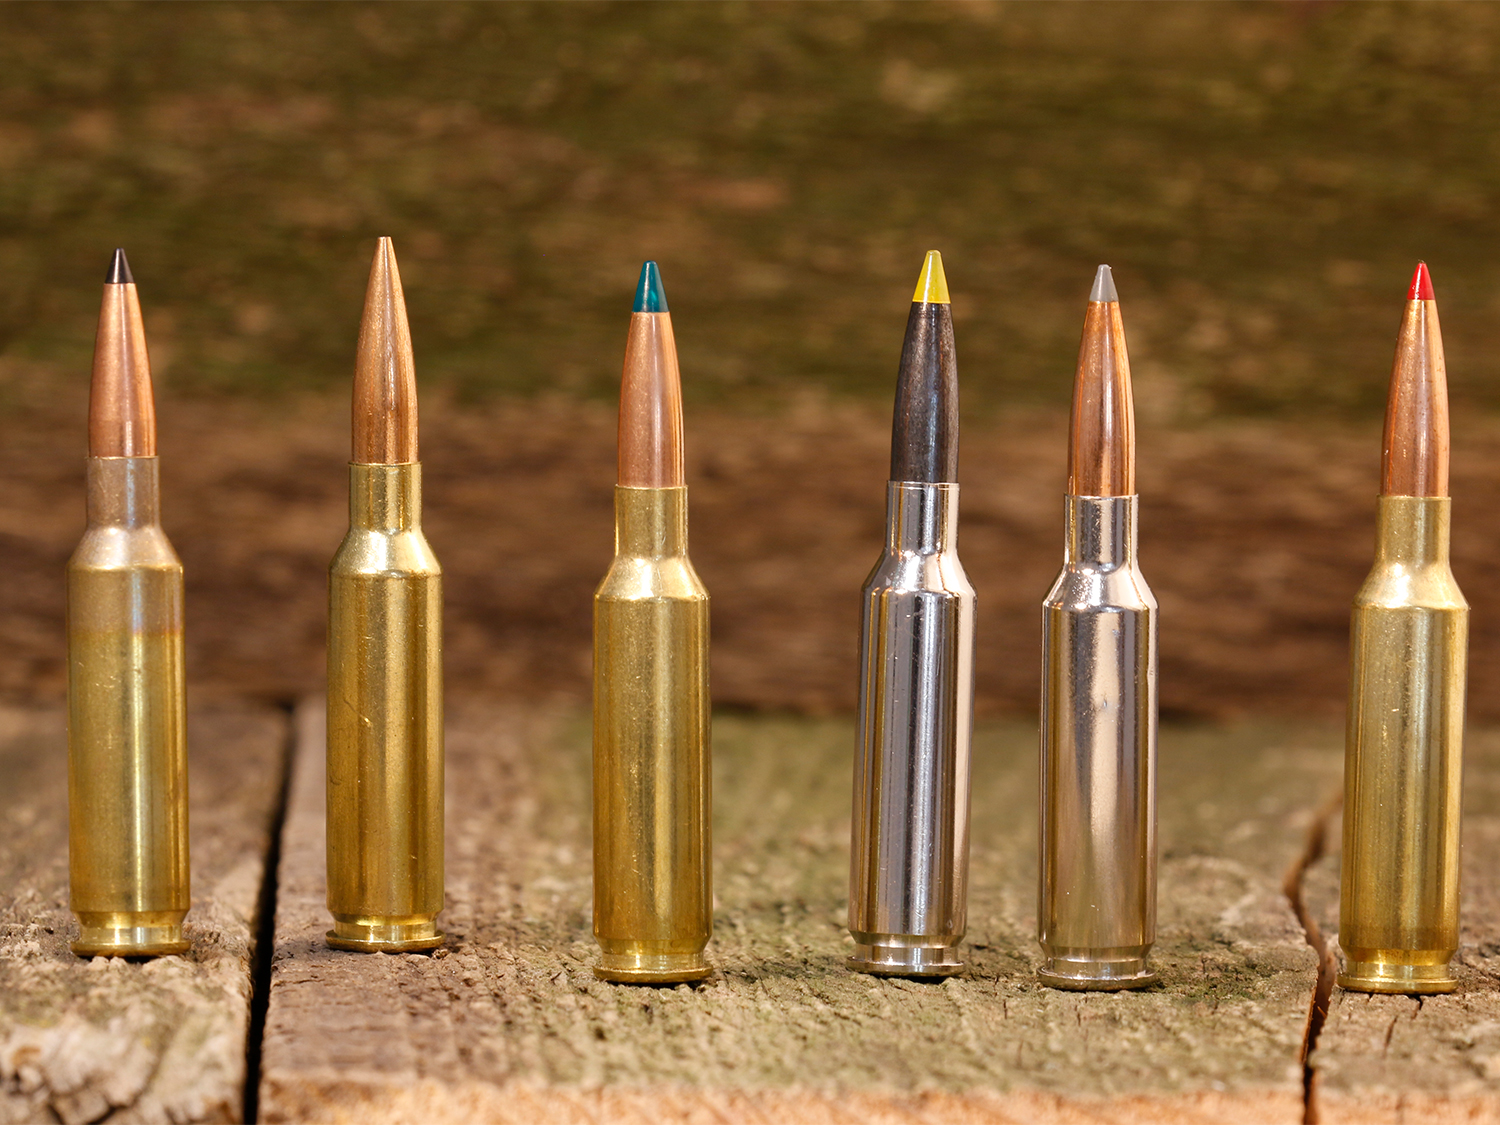 A lineup of 6.5 Creedmoor rifle cartridges on a wooden table.